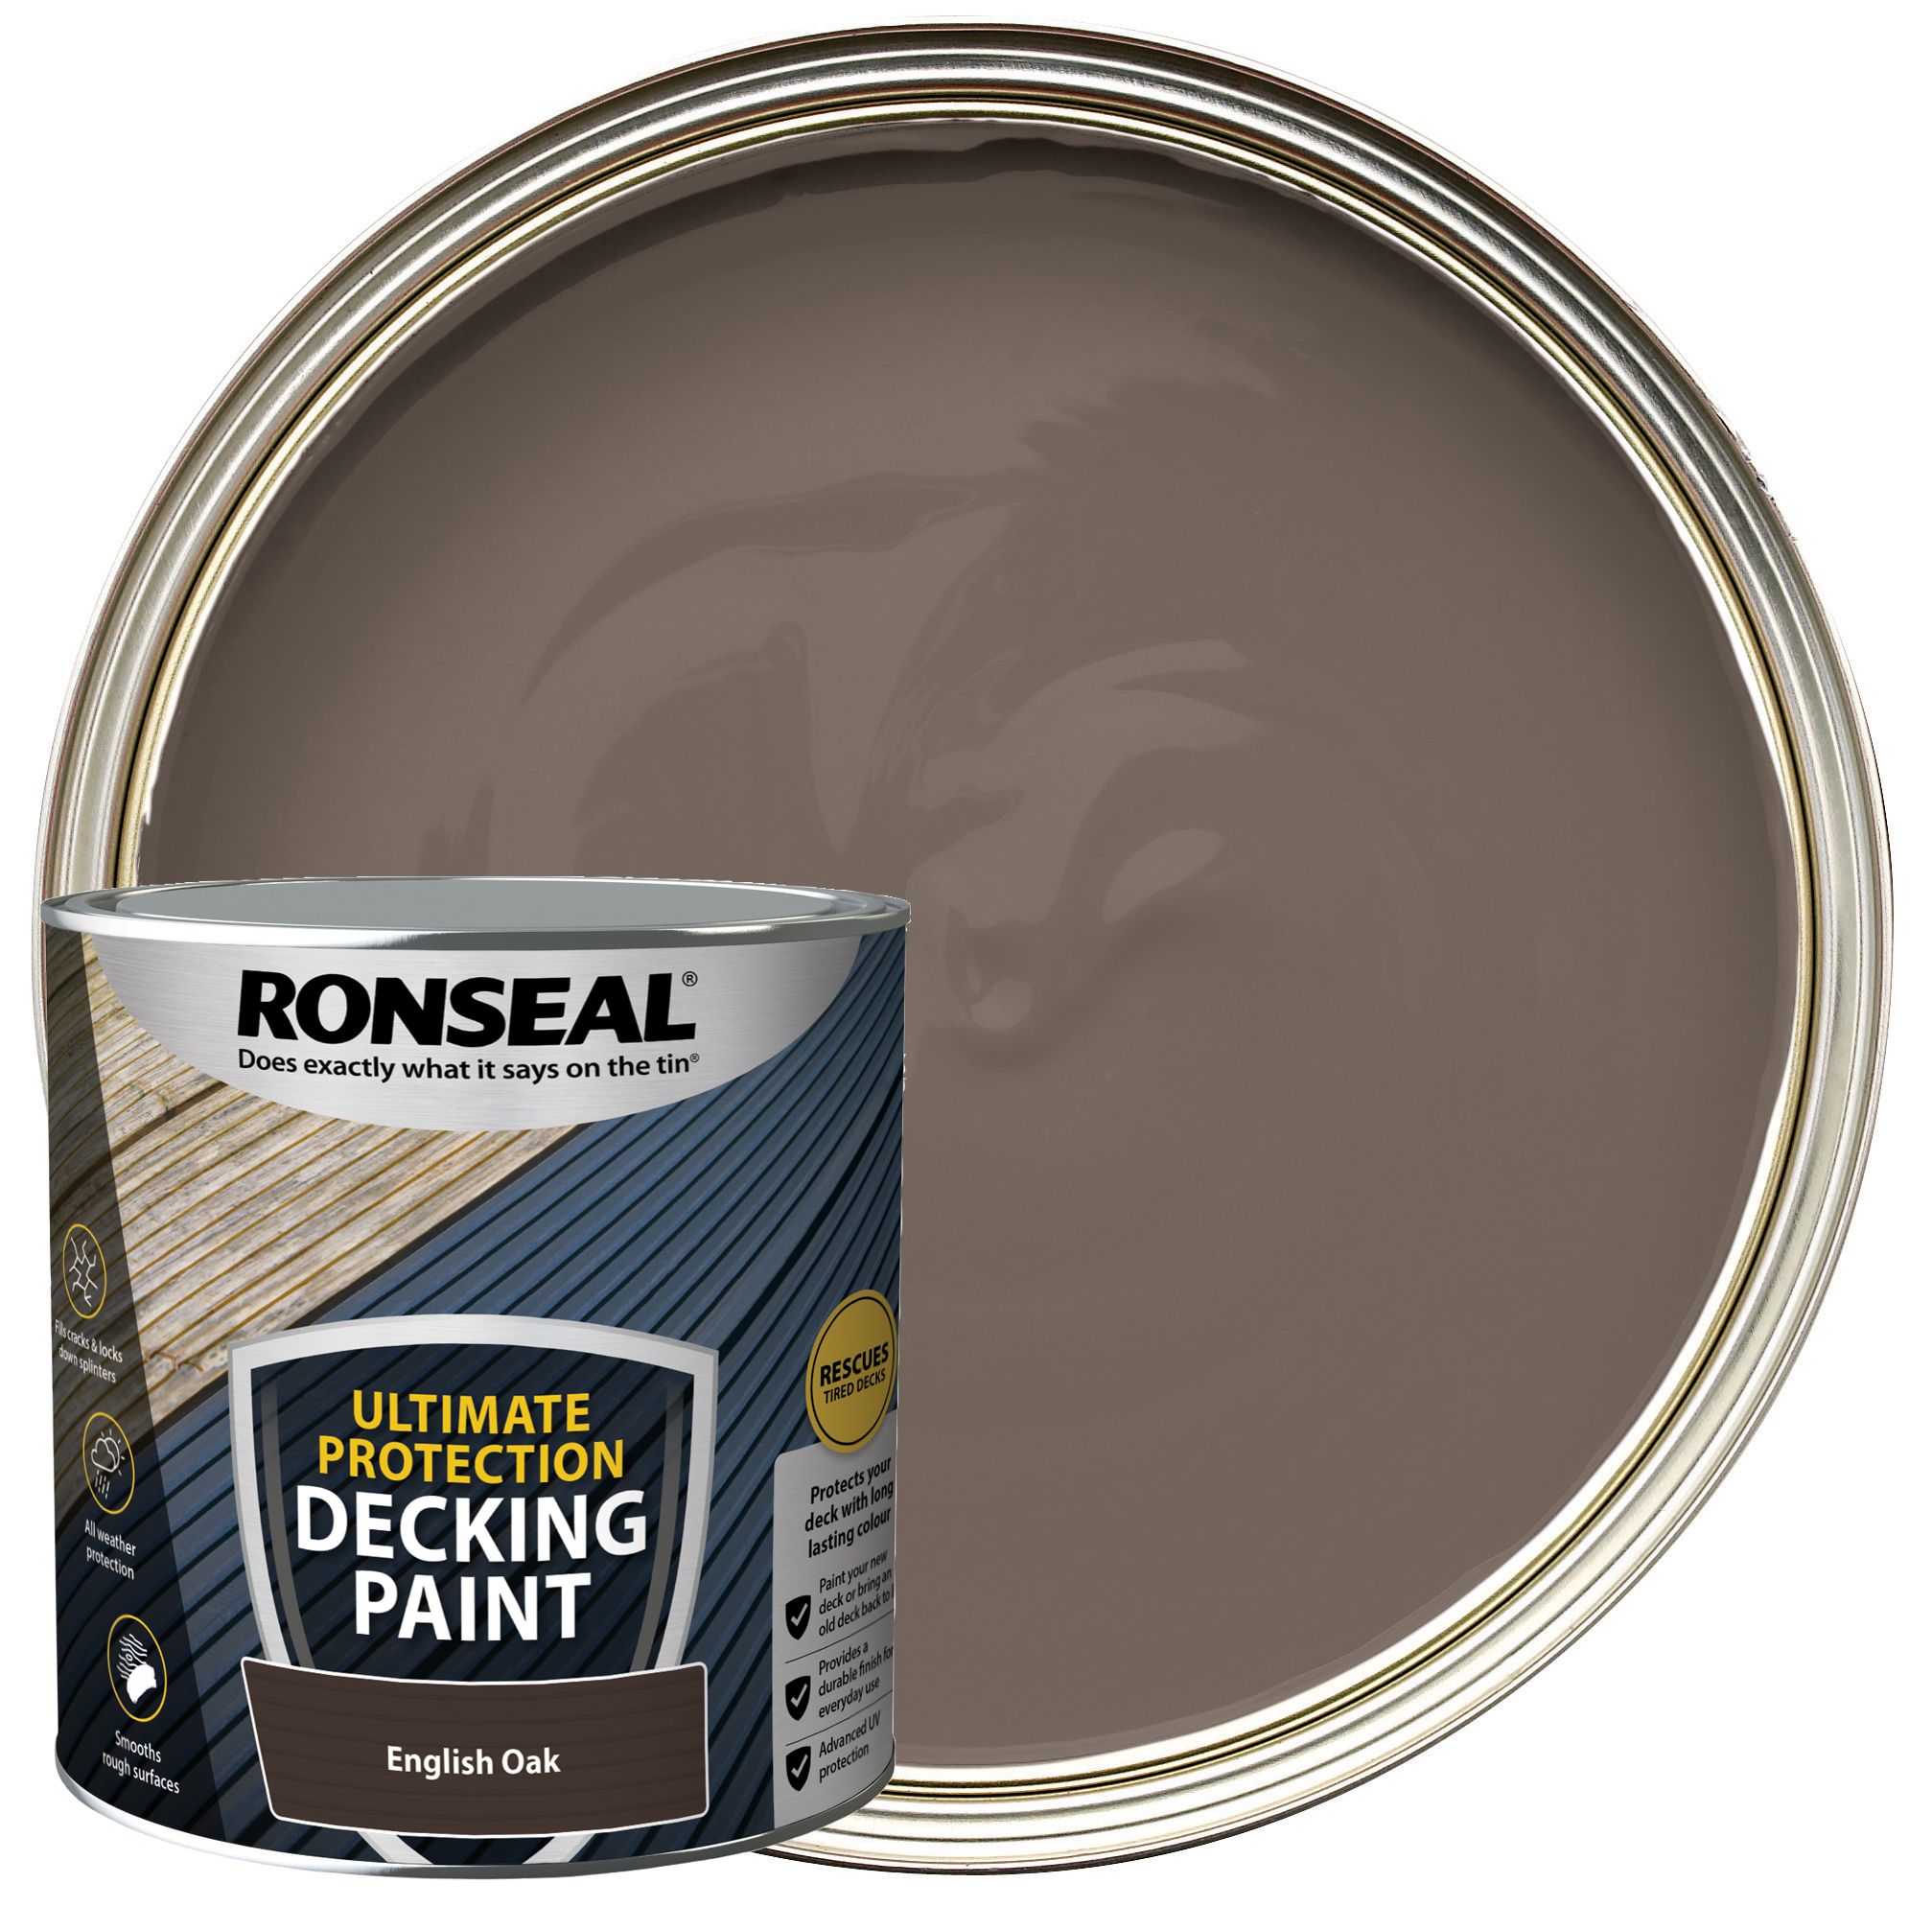 Image of Ronseal Ultimate Protection English Oak Decking Paint - 2.5L